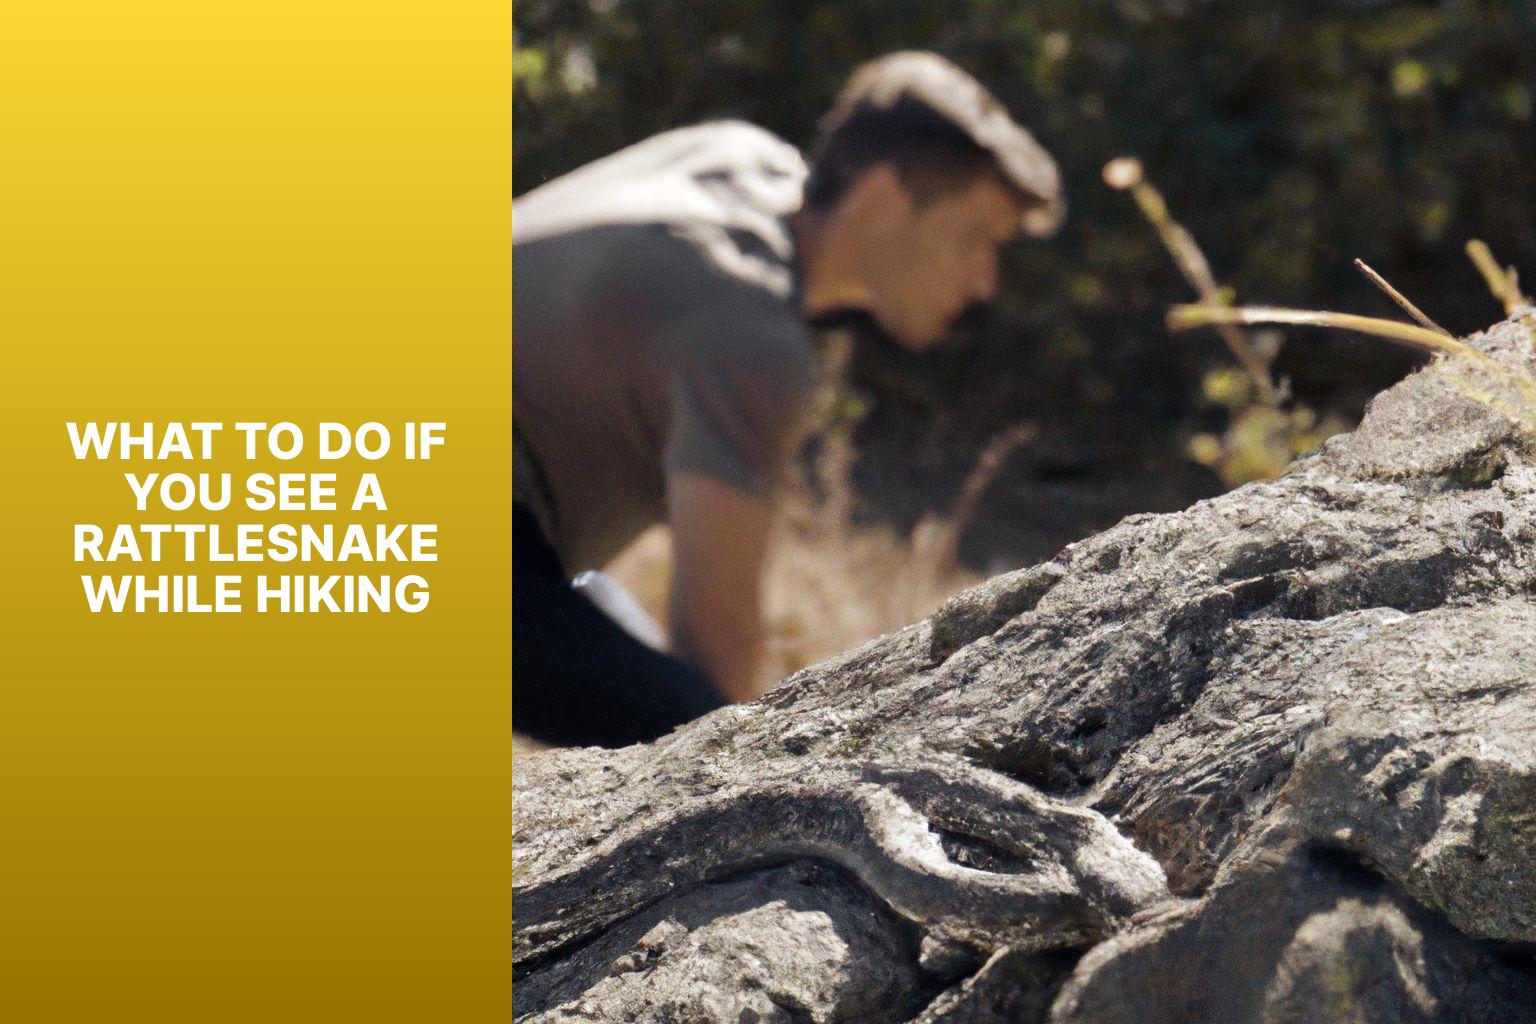 what to do if you see a rattlesnake while hikingtup0